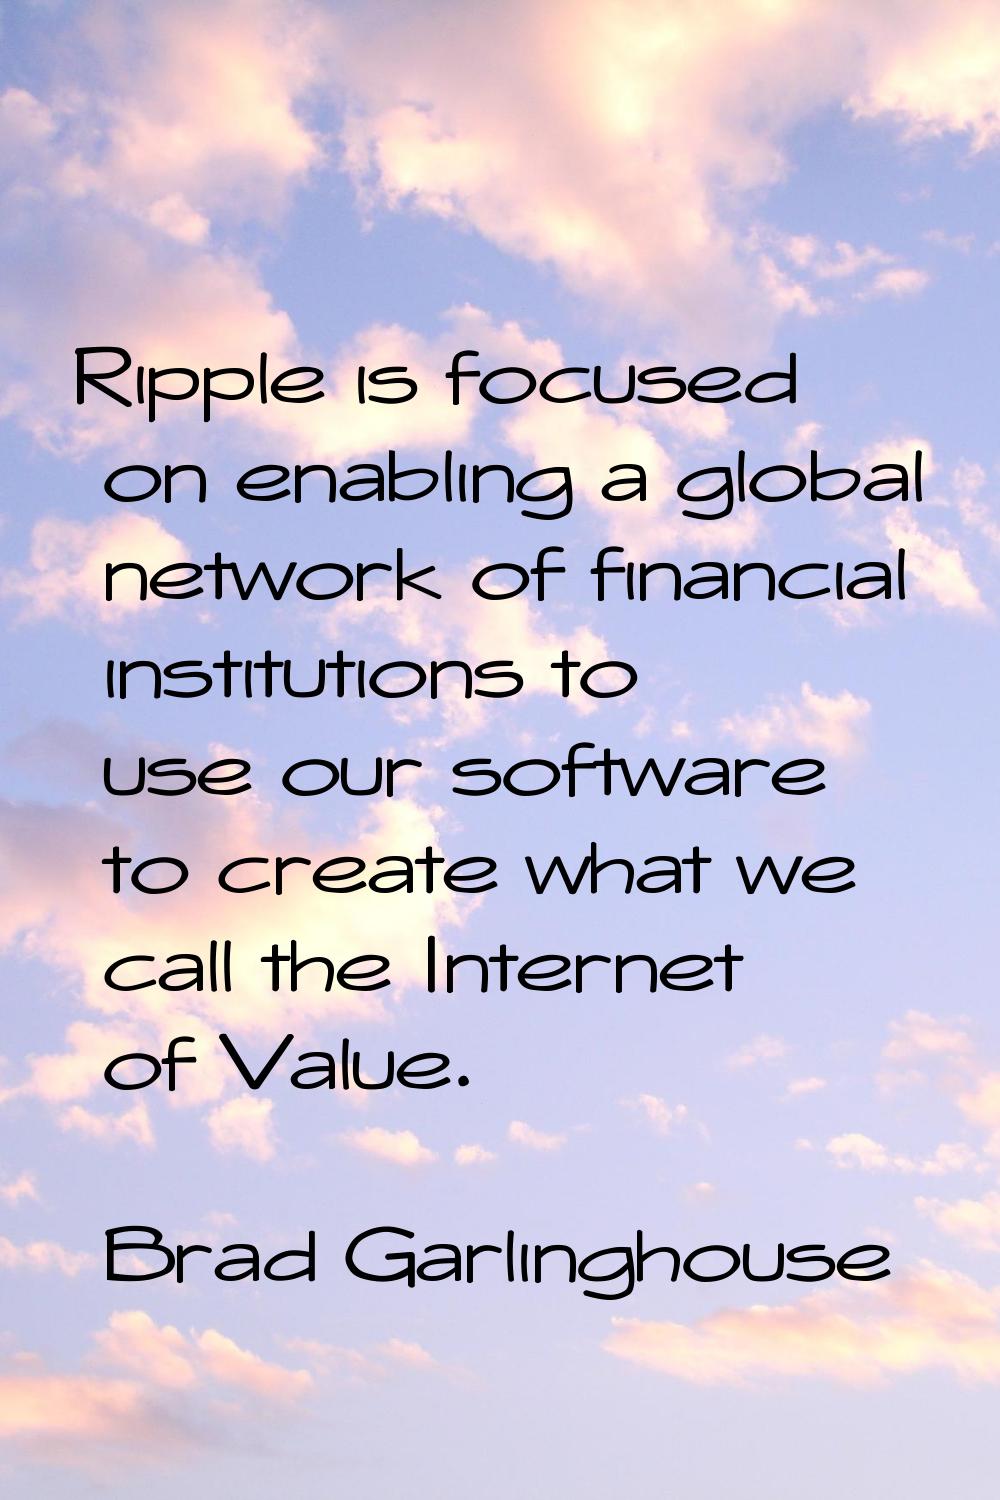 Ripple is focused on enabling a global network of financial institutions to use our software to cre